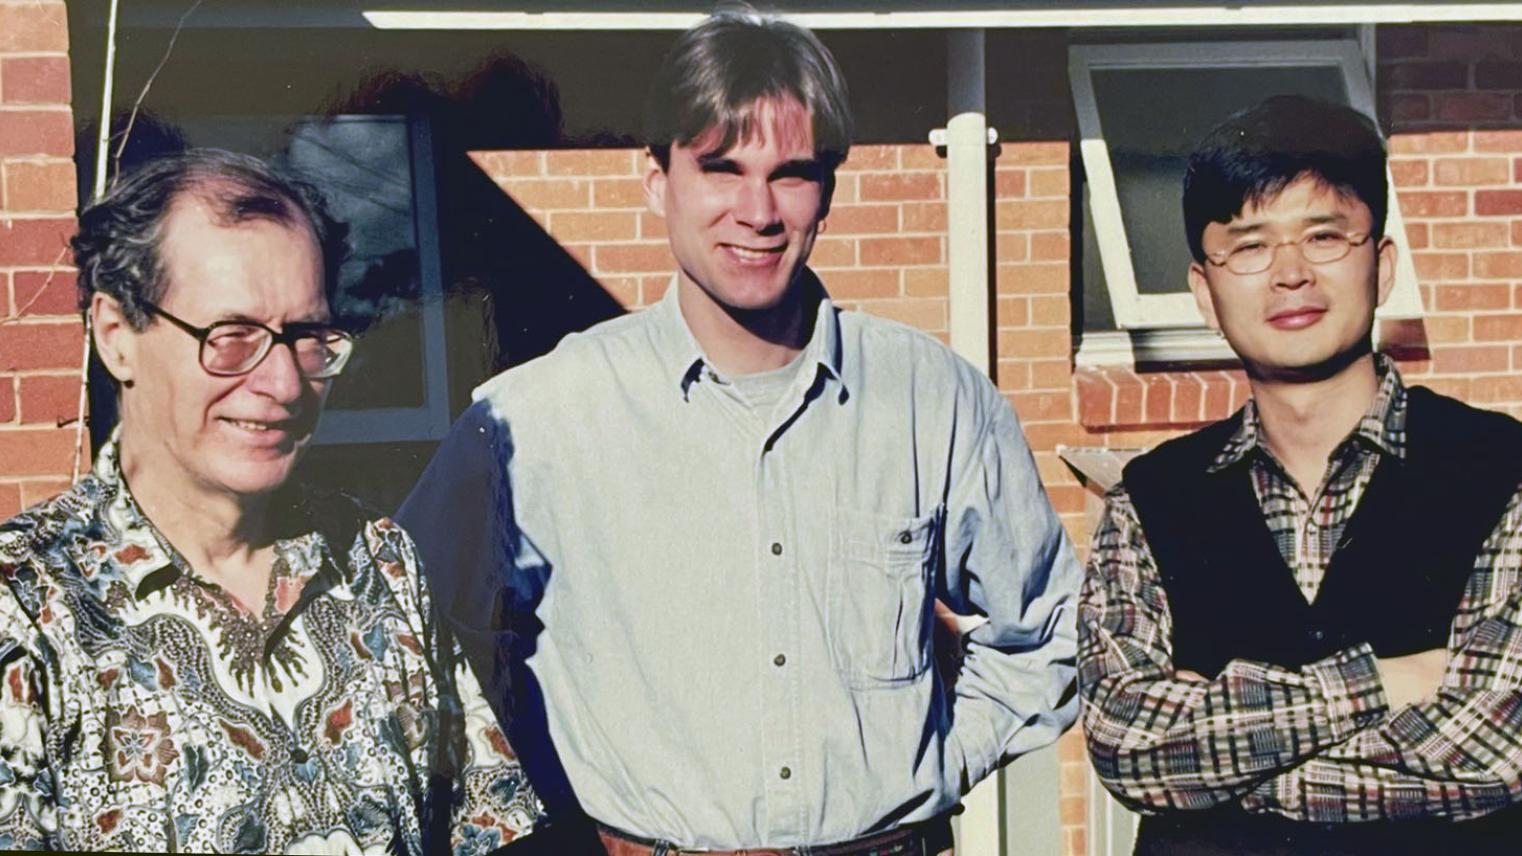 Harold Crouch (left) with PhD students, Marcus Mietzner (now an Indonesia specialist based at ANU) and Inwon Hwang (South Korea's leading Malaysian politics expert), c. 1997. 